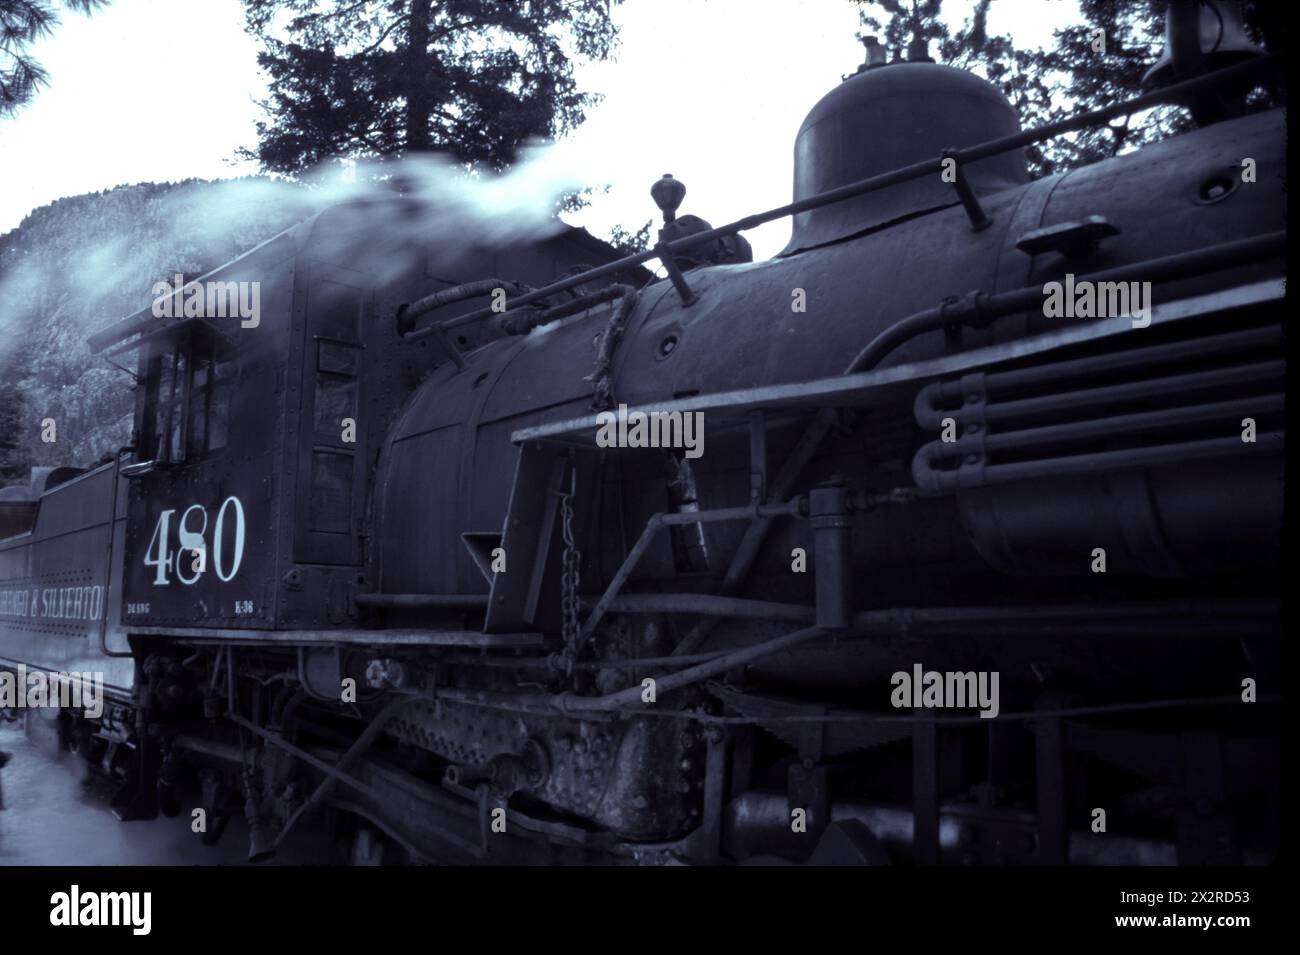 Working Durango & Silverton locomotive parked with steam in a mountain forest. Stock Photo